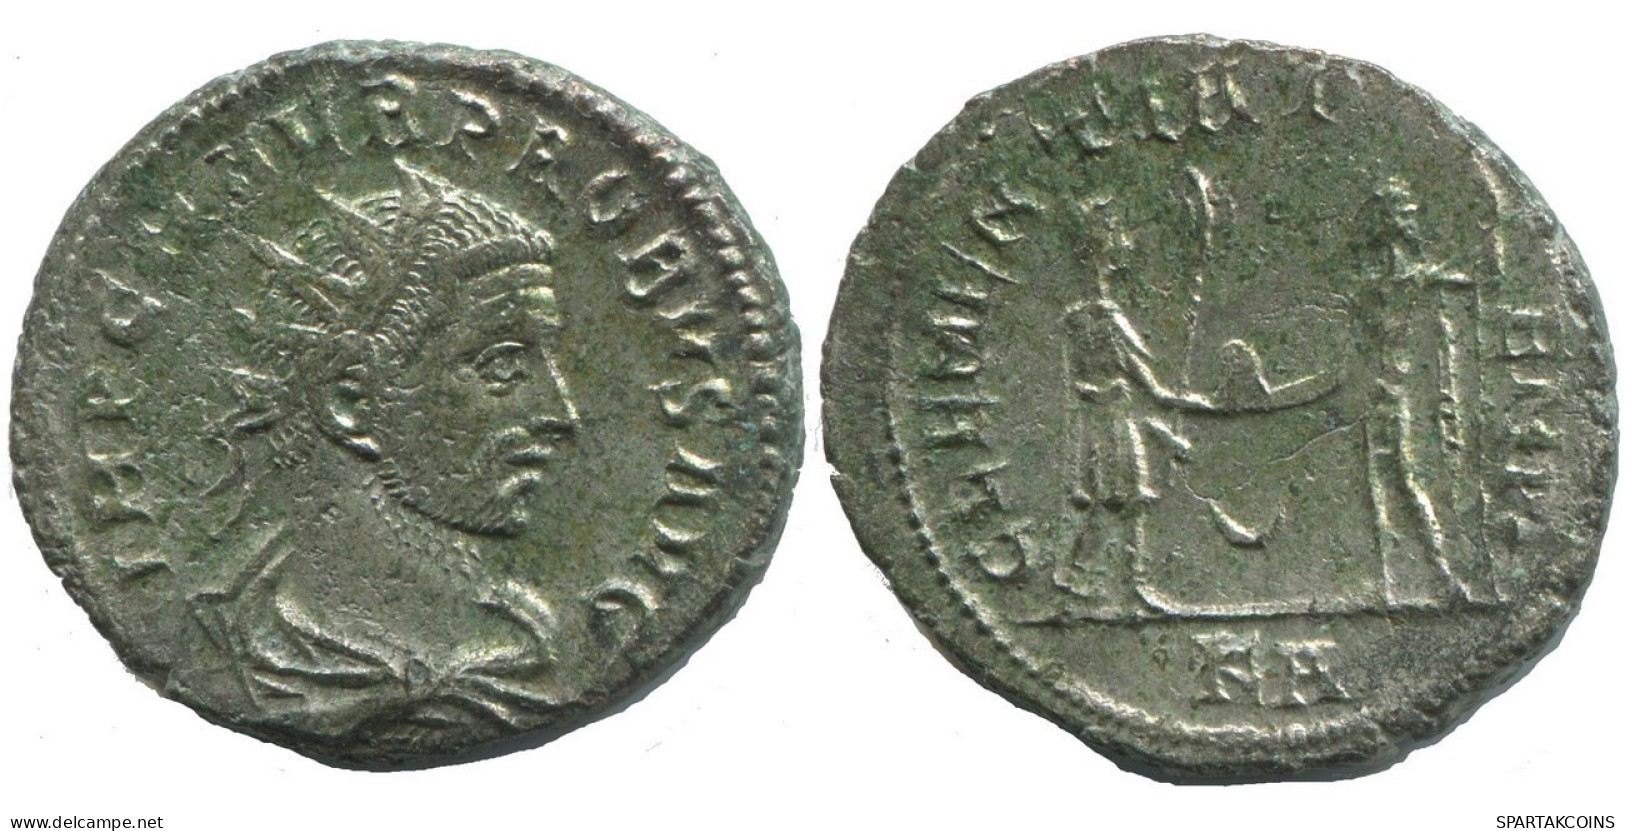 PROBUS TRIPOLIS KA AD276-282 SILVERED RÖMISCHEN 4.2g/23mm #ANT2677.41.D.A - The Military Crisis (235 AD Tot 284 AD)